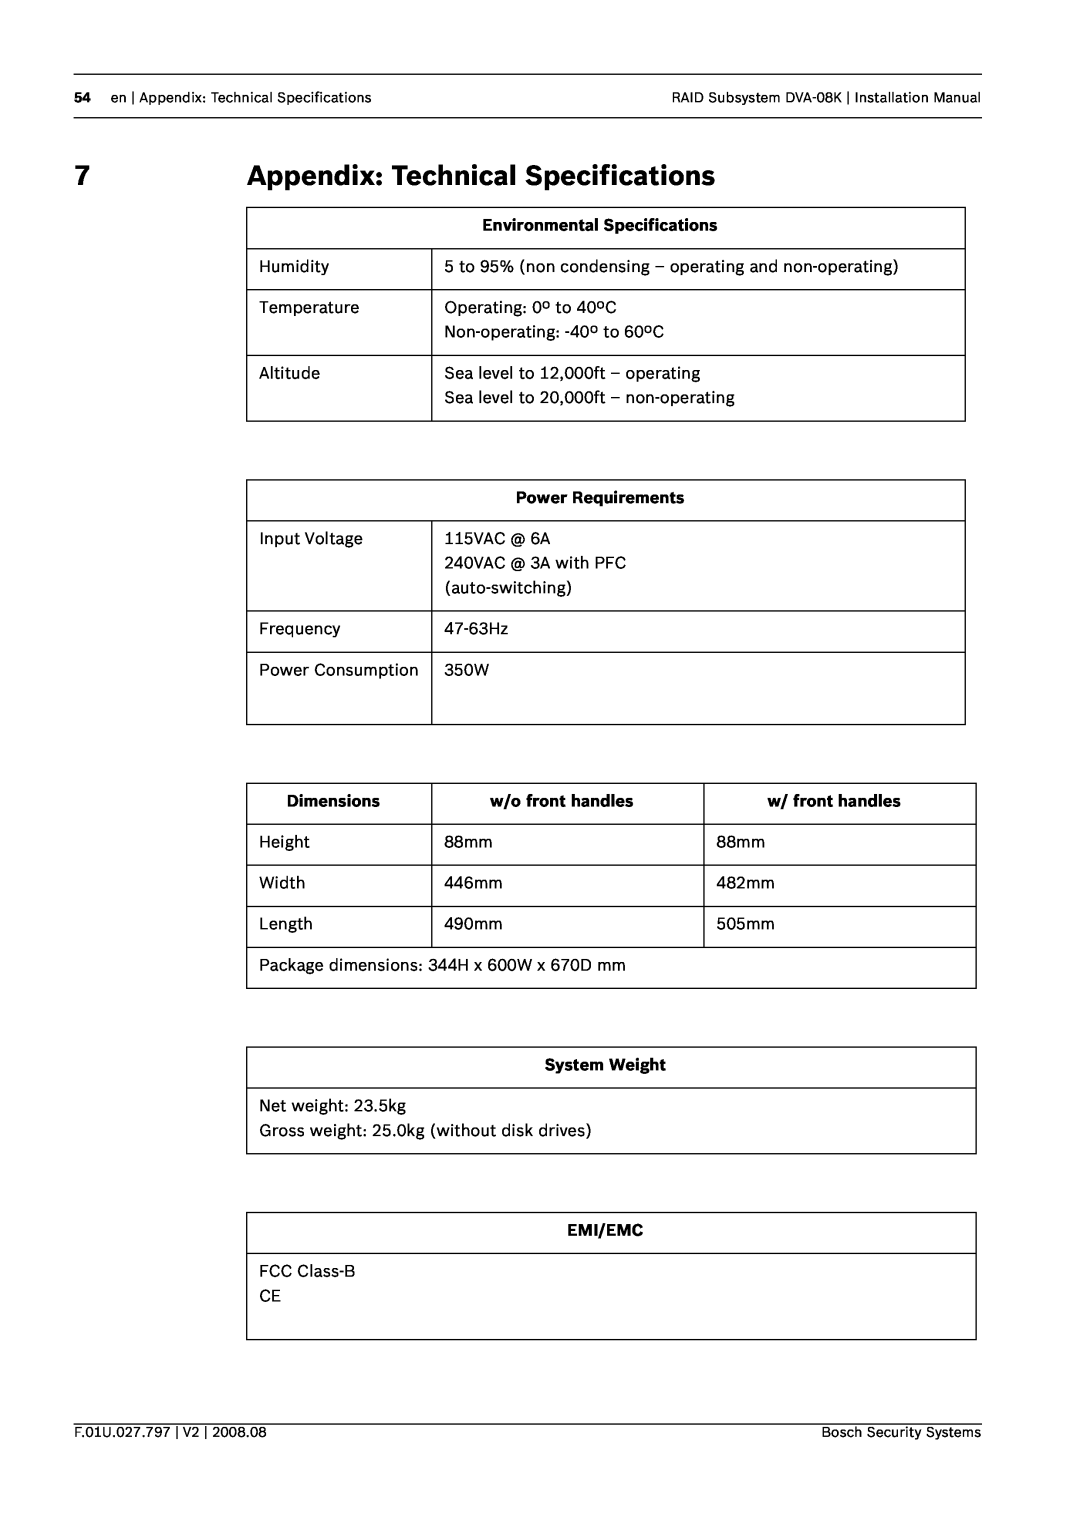 Bosch Appliances DVA-08K Appendix Technical Specifications, Environmental Specifications, Power Requirements, Dimensions 